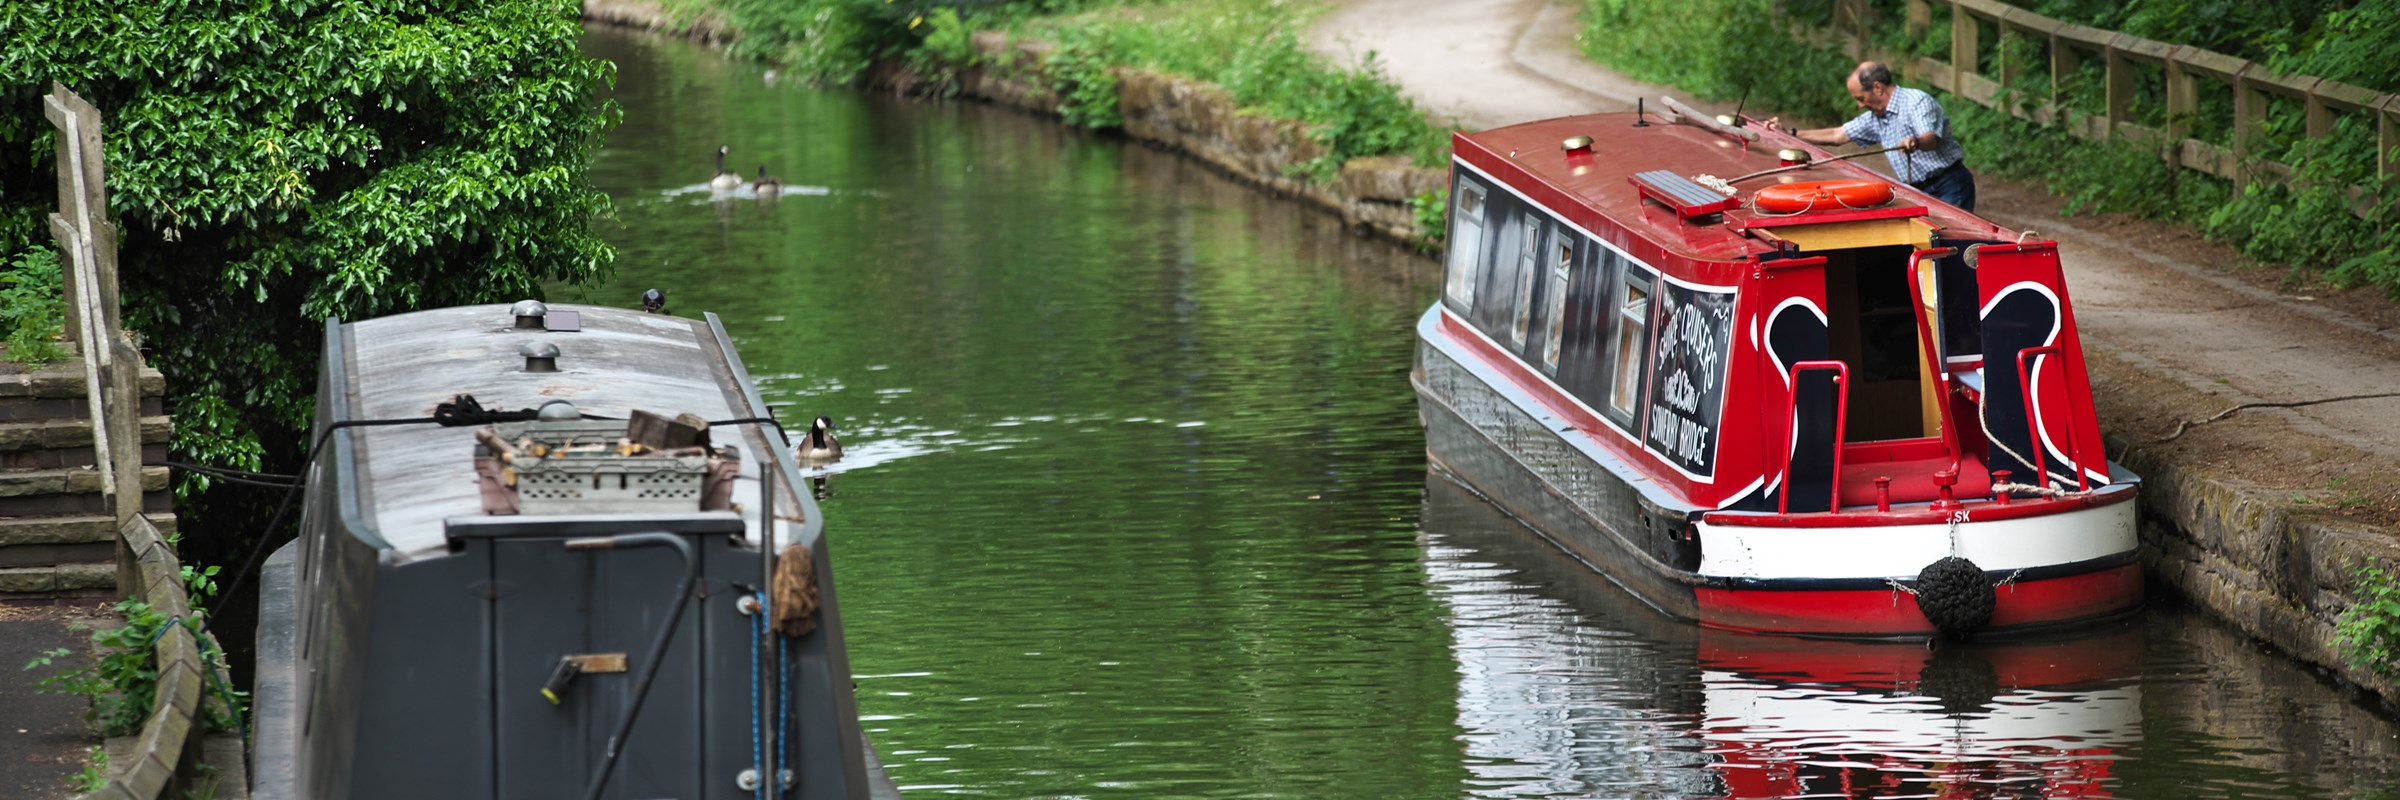 Two docked canal boats situated in the canal water beside a pathway, and surrounded by tree area.